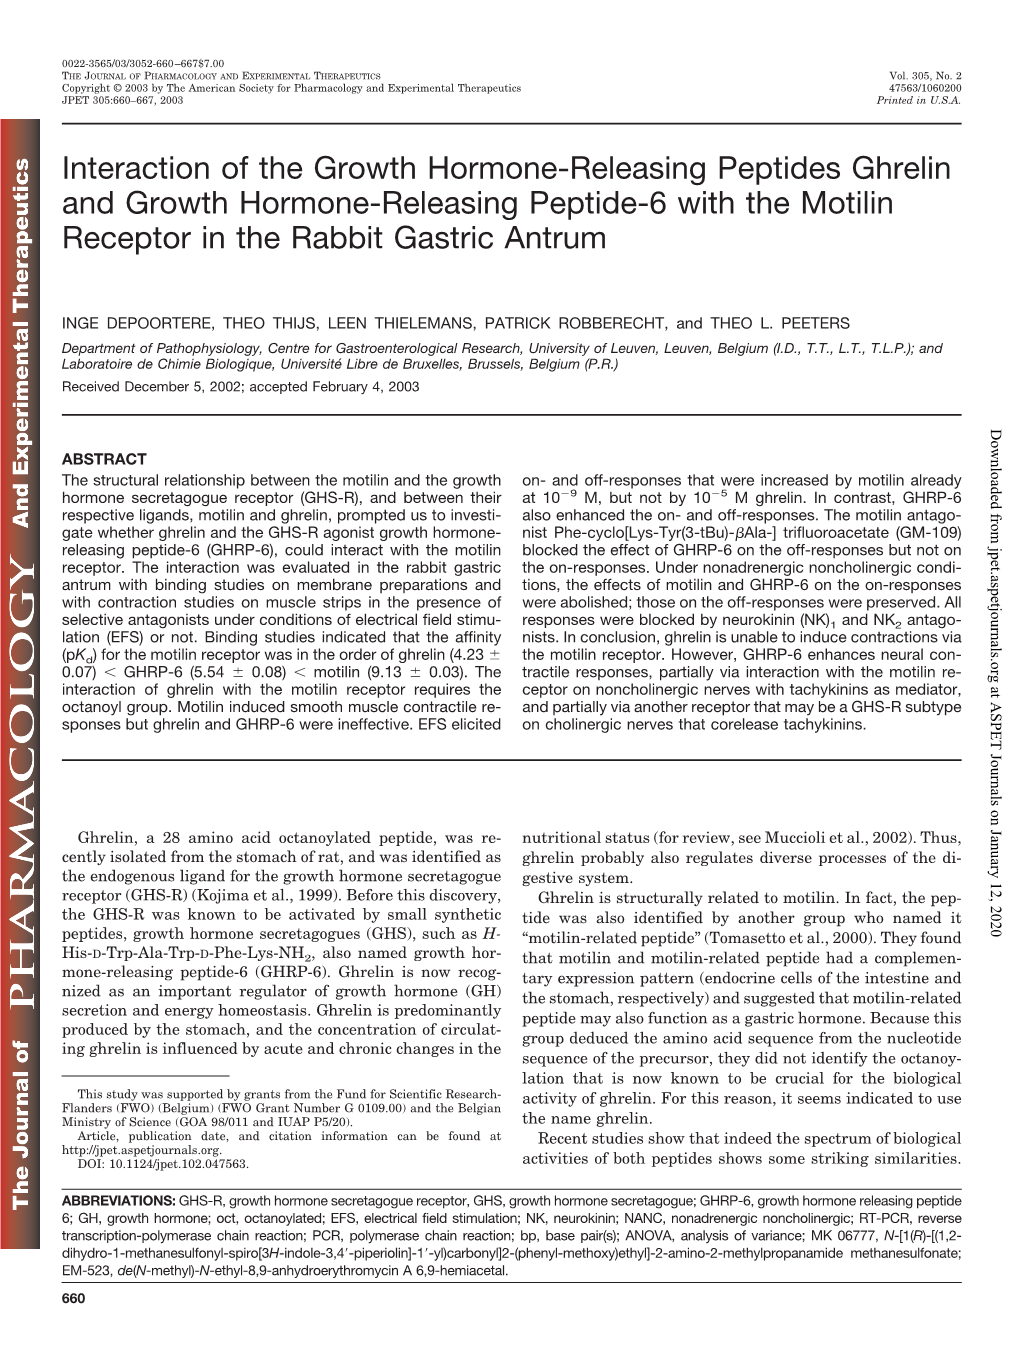 Interaction of the Growth Hormone-Releasing Peptides Ghrelin and Growth Hormone-Releasing Peptide-6 with the Motilin Receptor in the Rabbit Gastric Antrum